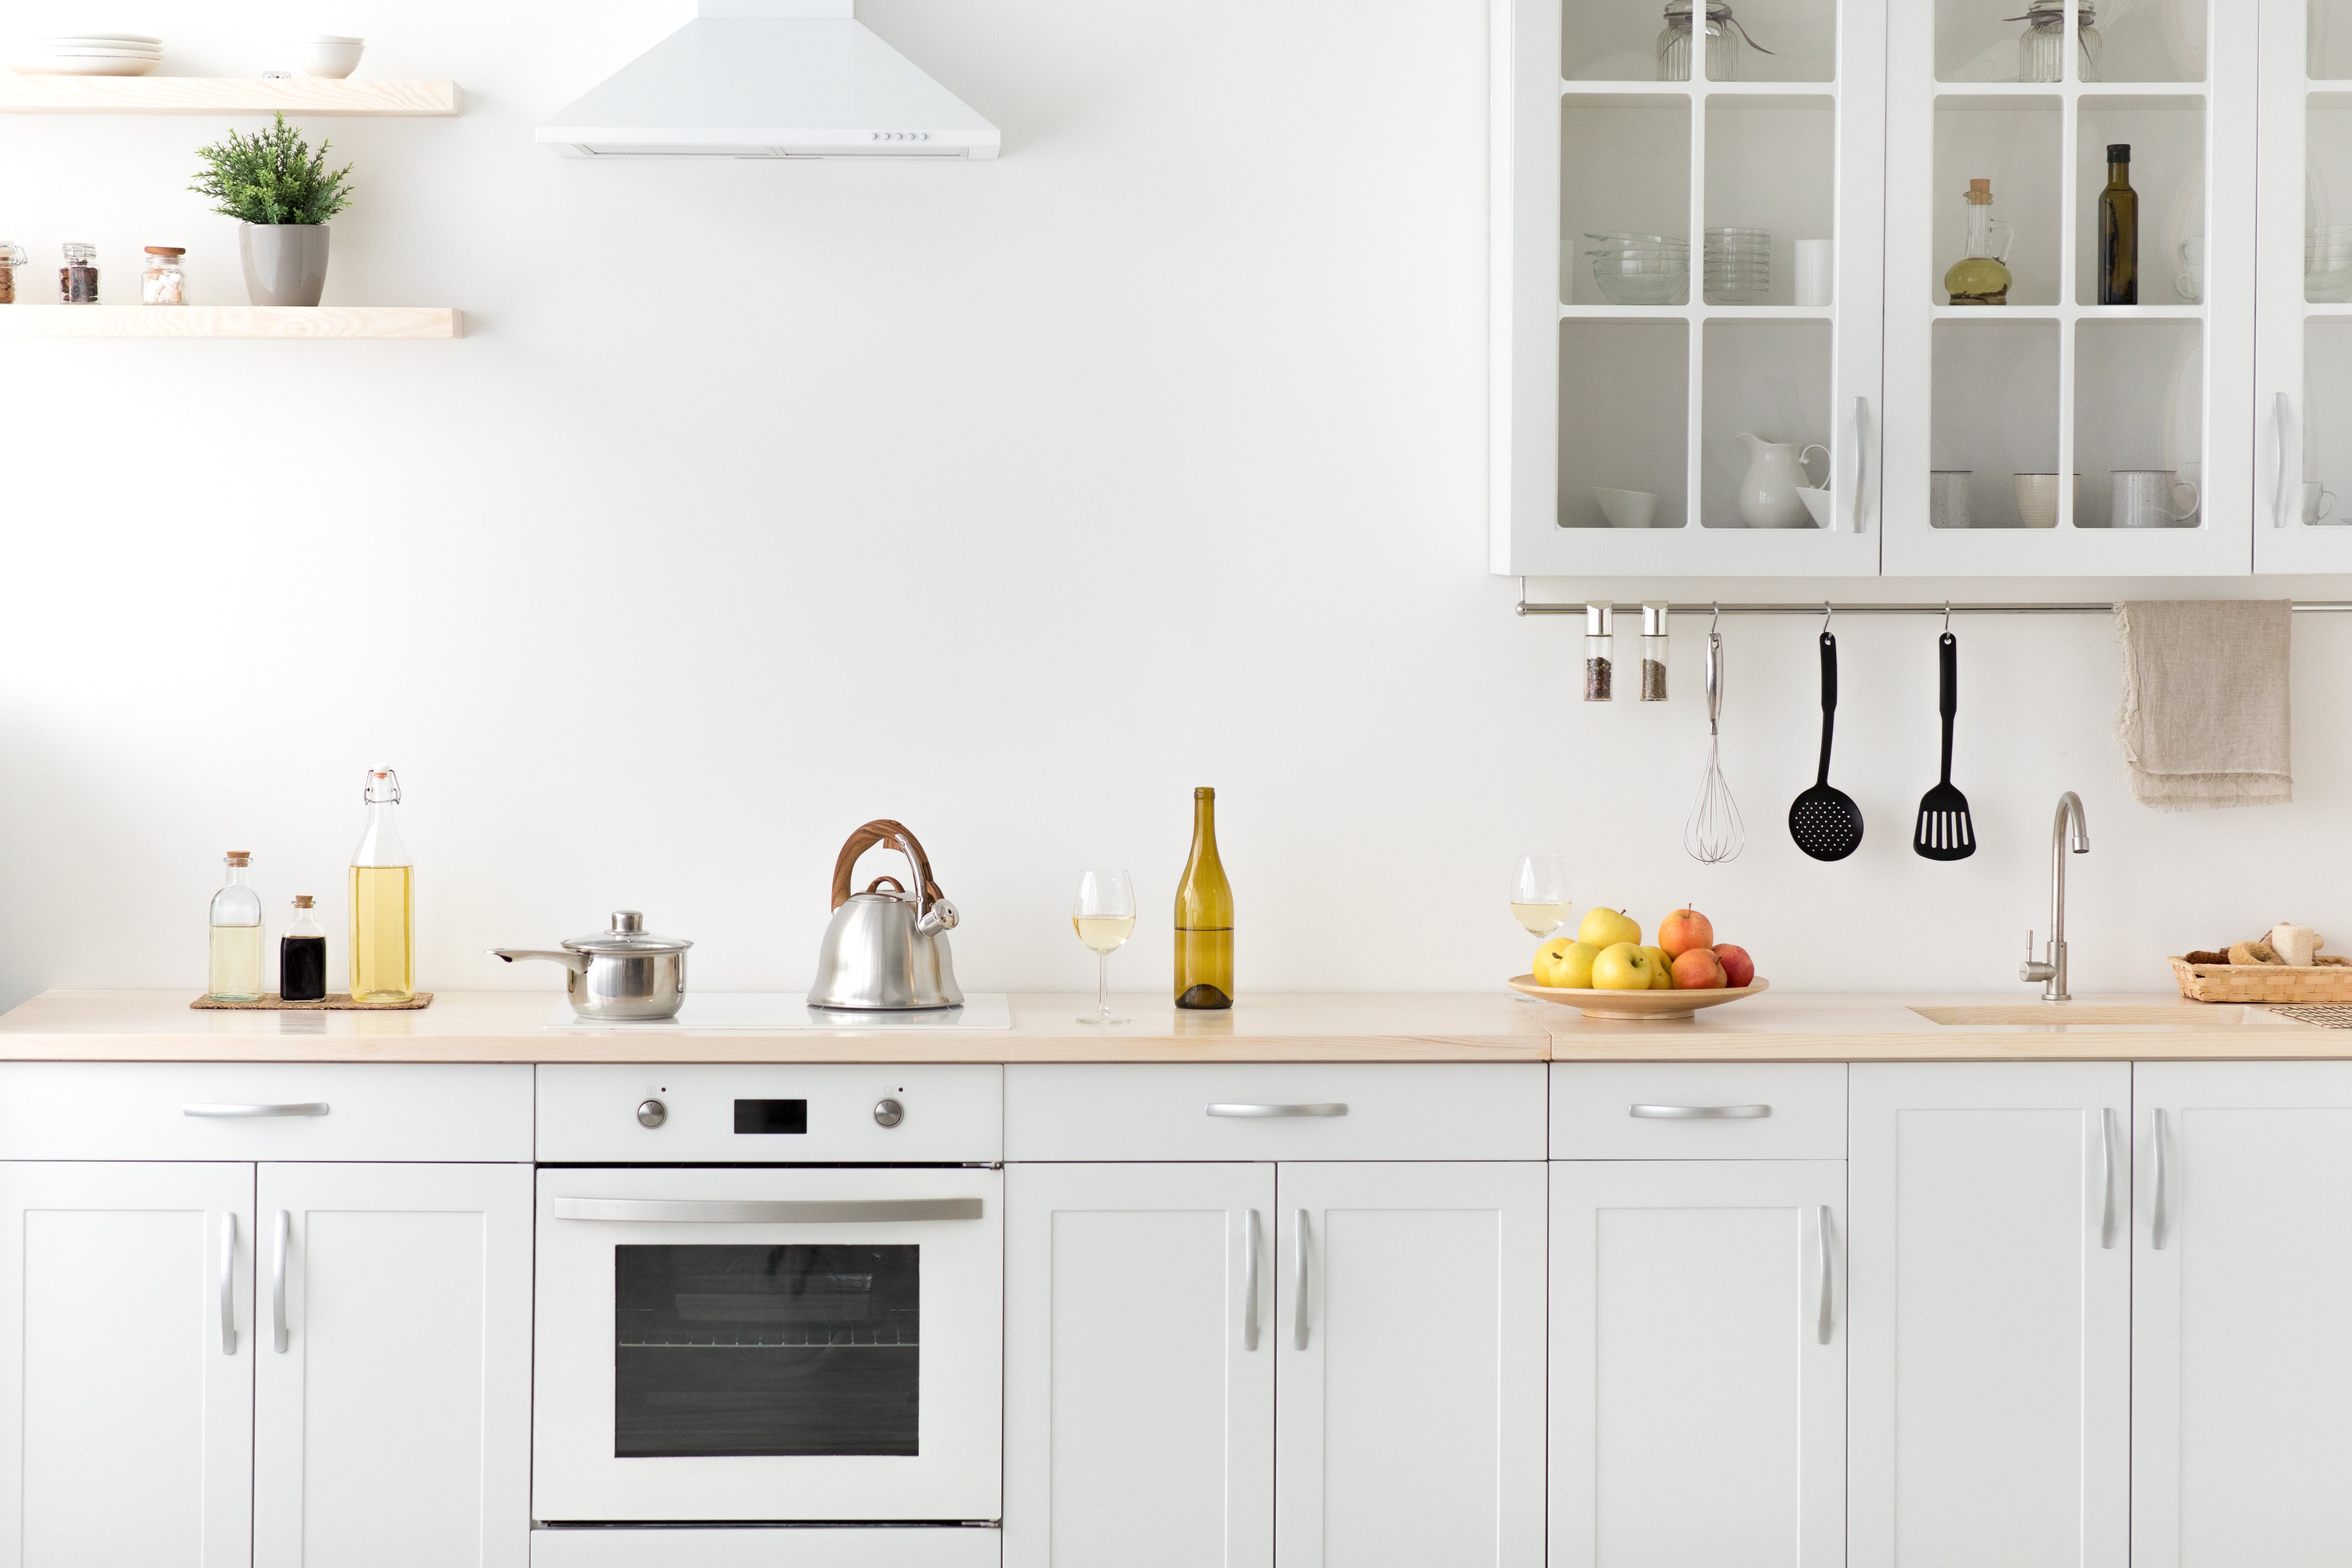 A clean, bright kitchen with white cabinets and a white wall